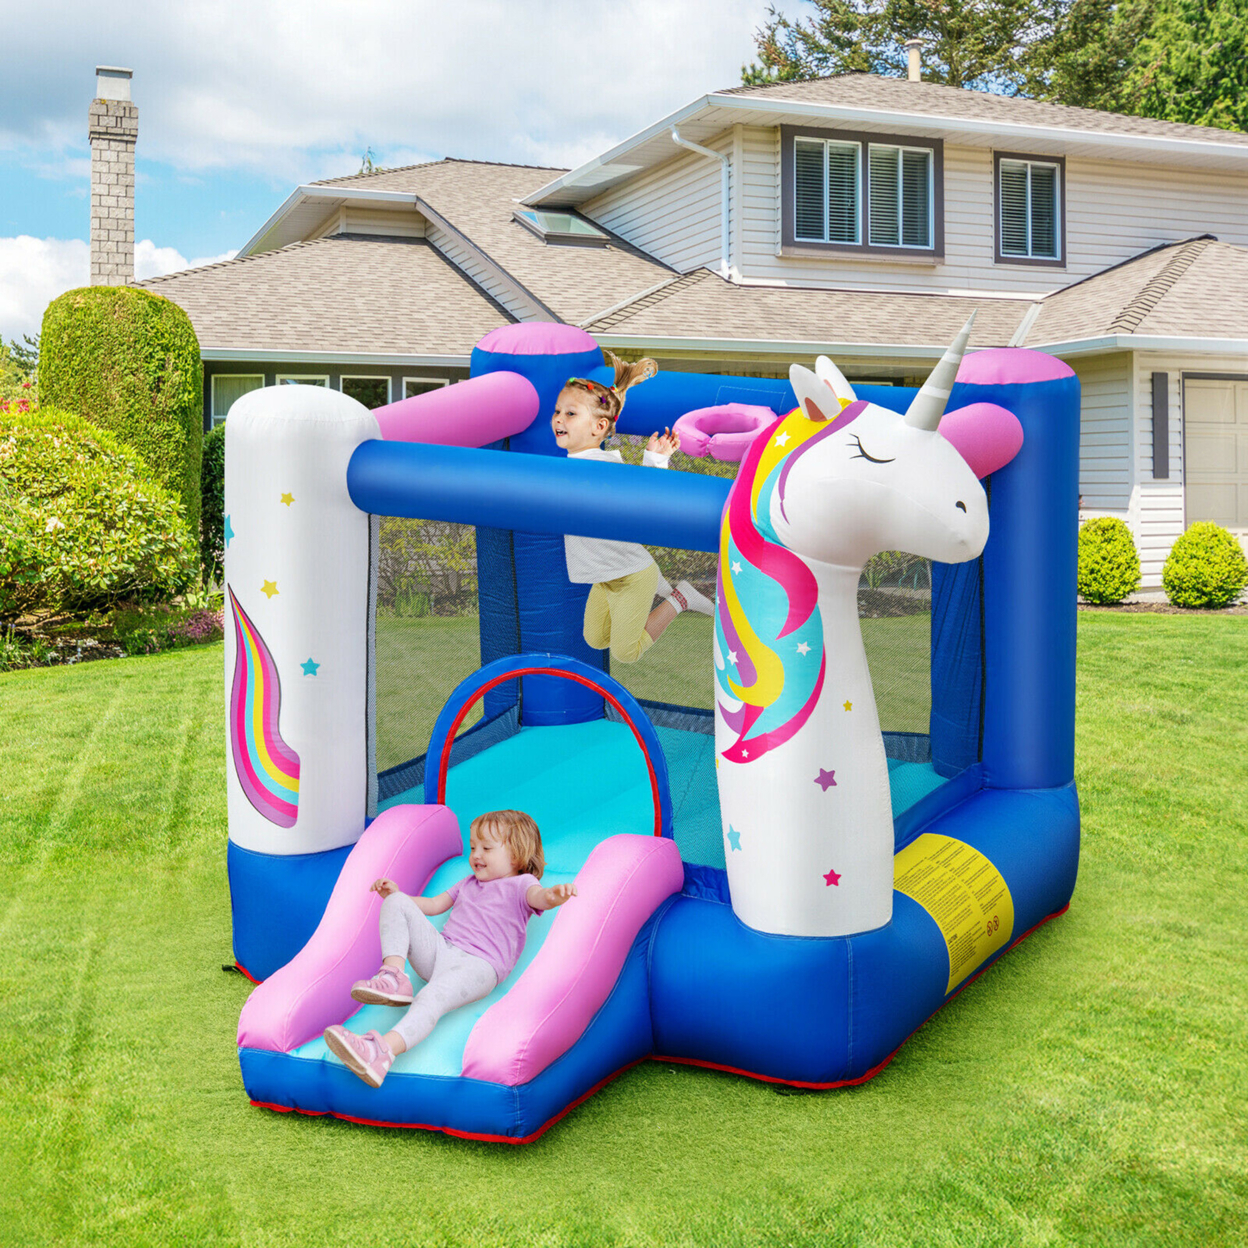 Slide Bouncer Inflatable Jumping Castle Basketball Game W/ 480W Blower